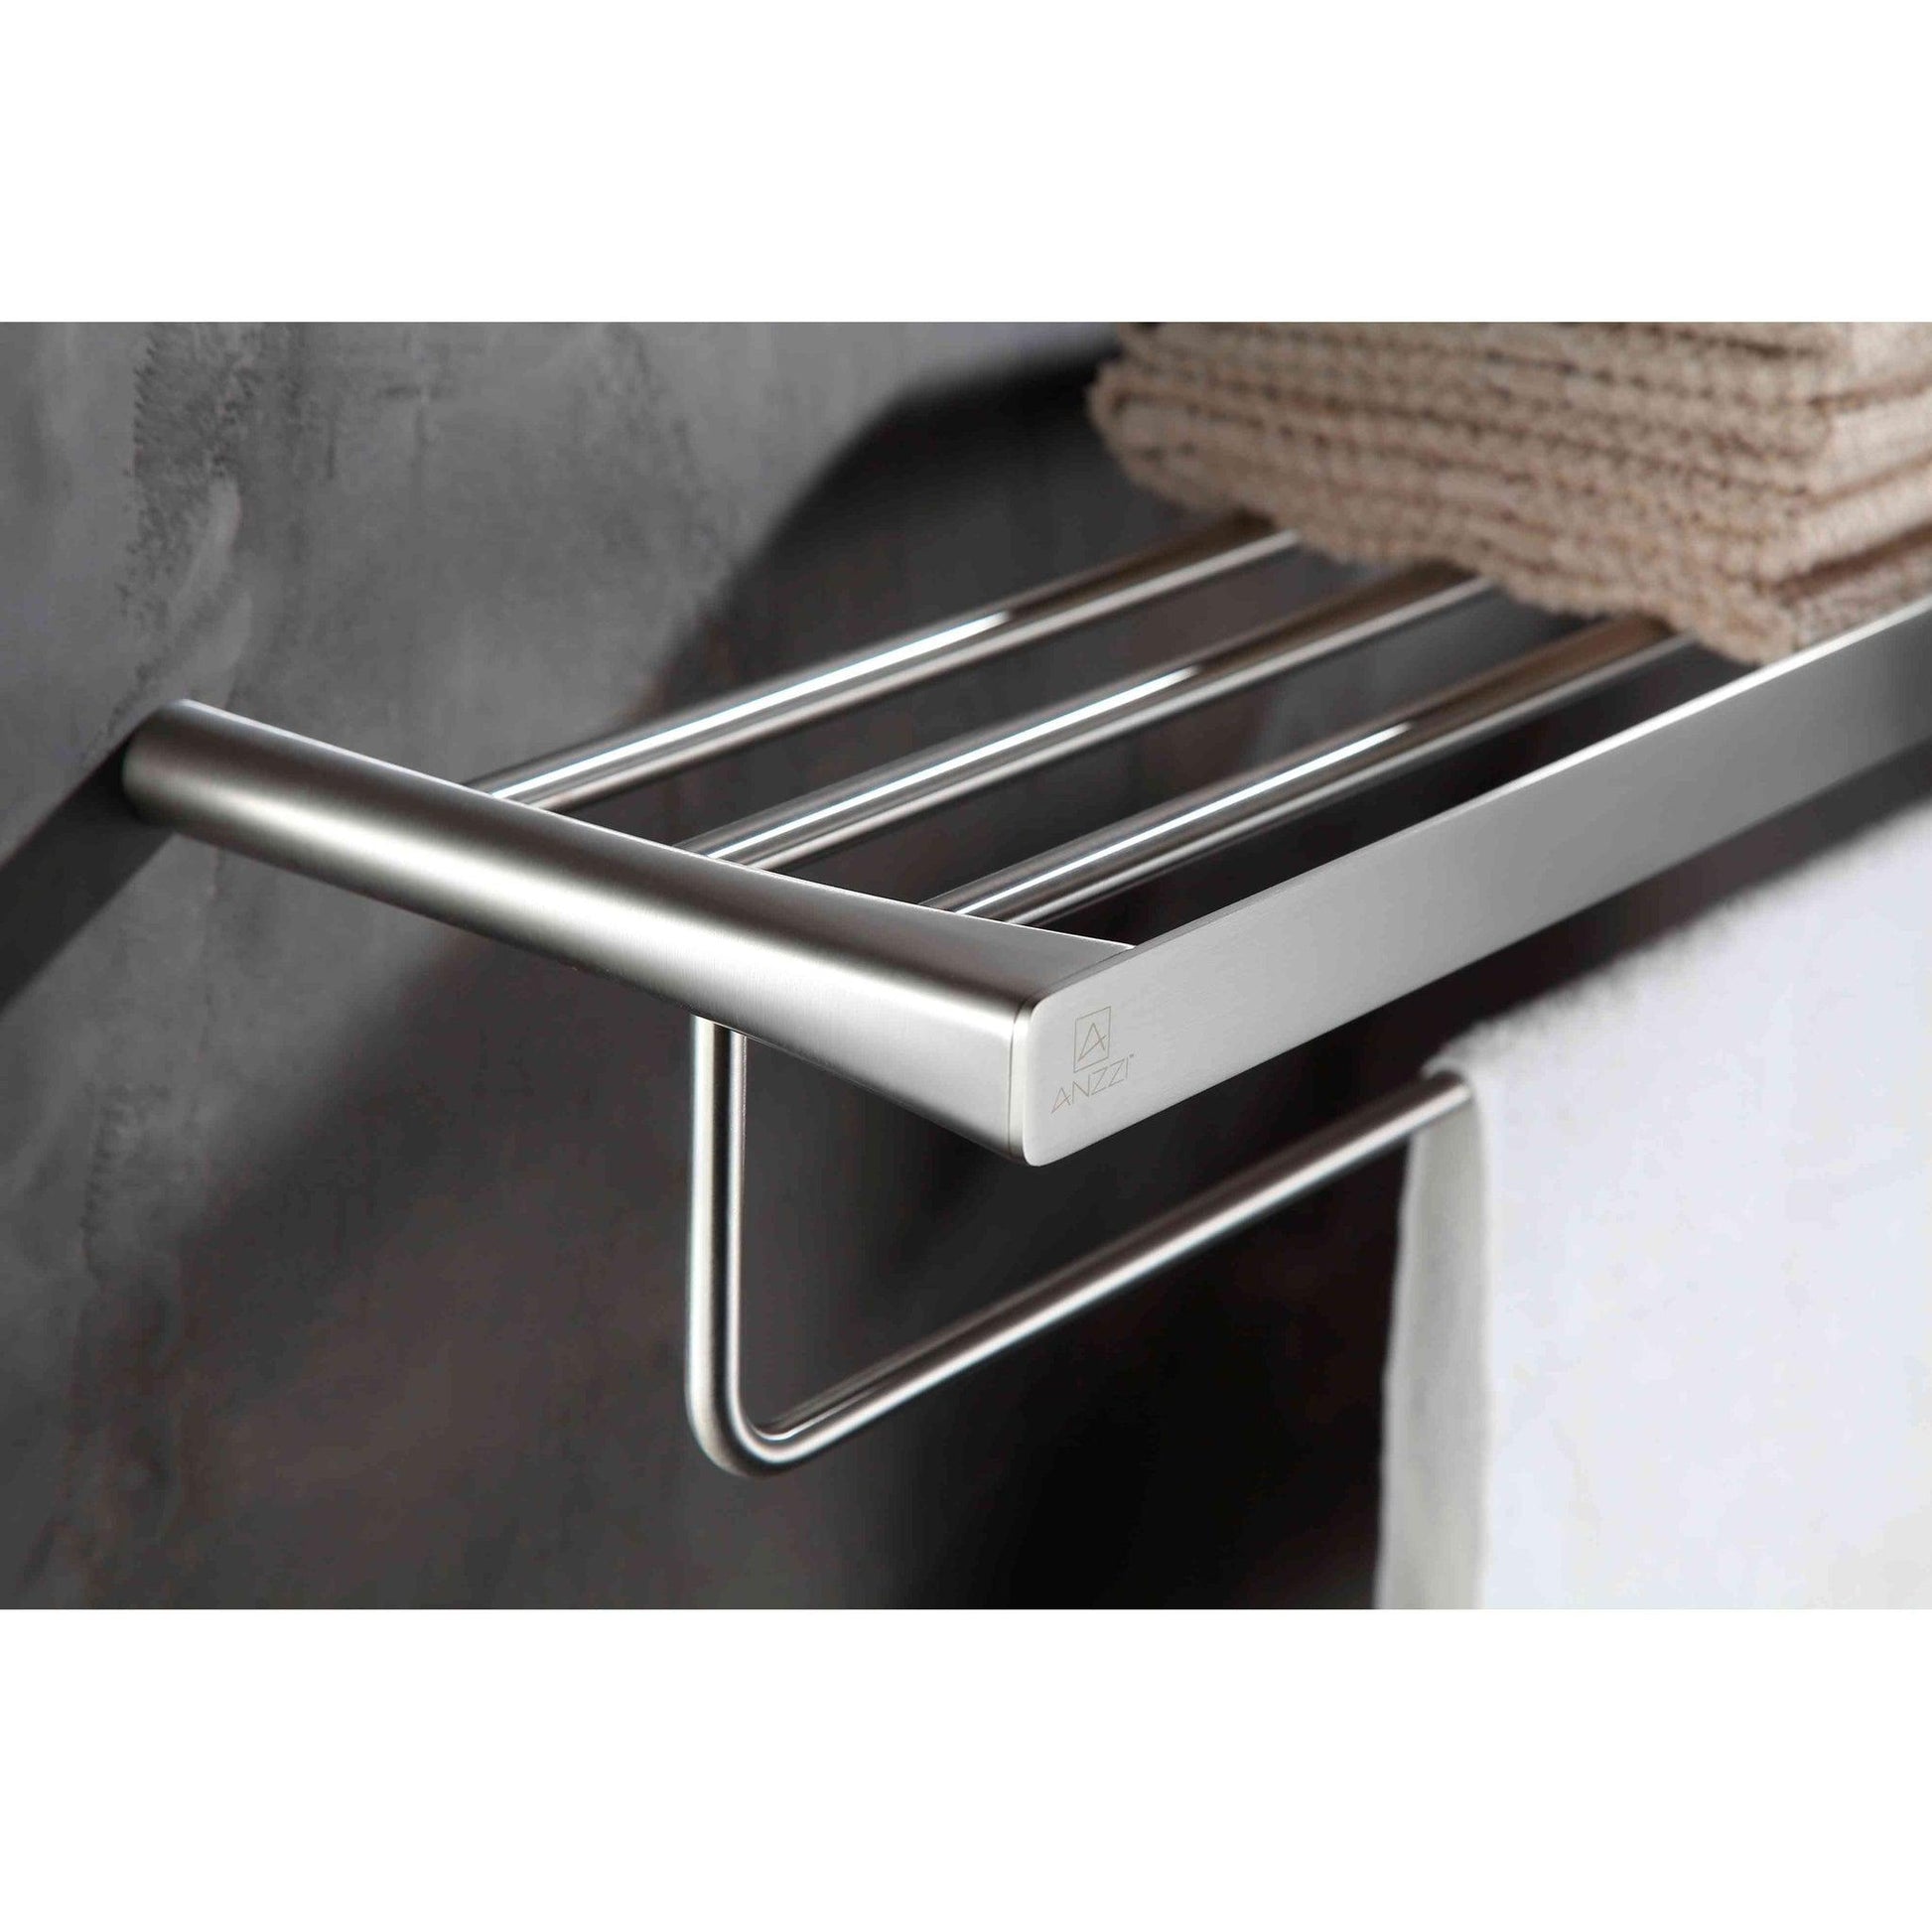 ANZZI Caster 3 Series 25" Wall-Mounted Brushed Nickel 3 Towel Bar With Towel Pole